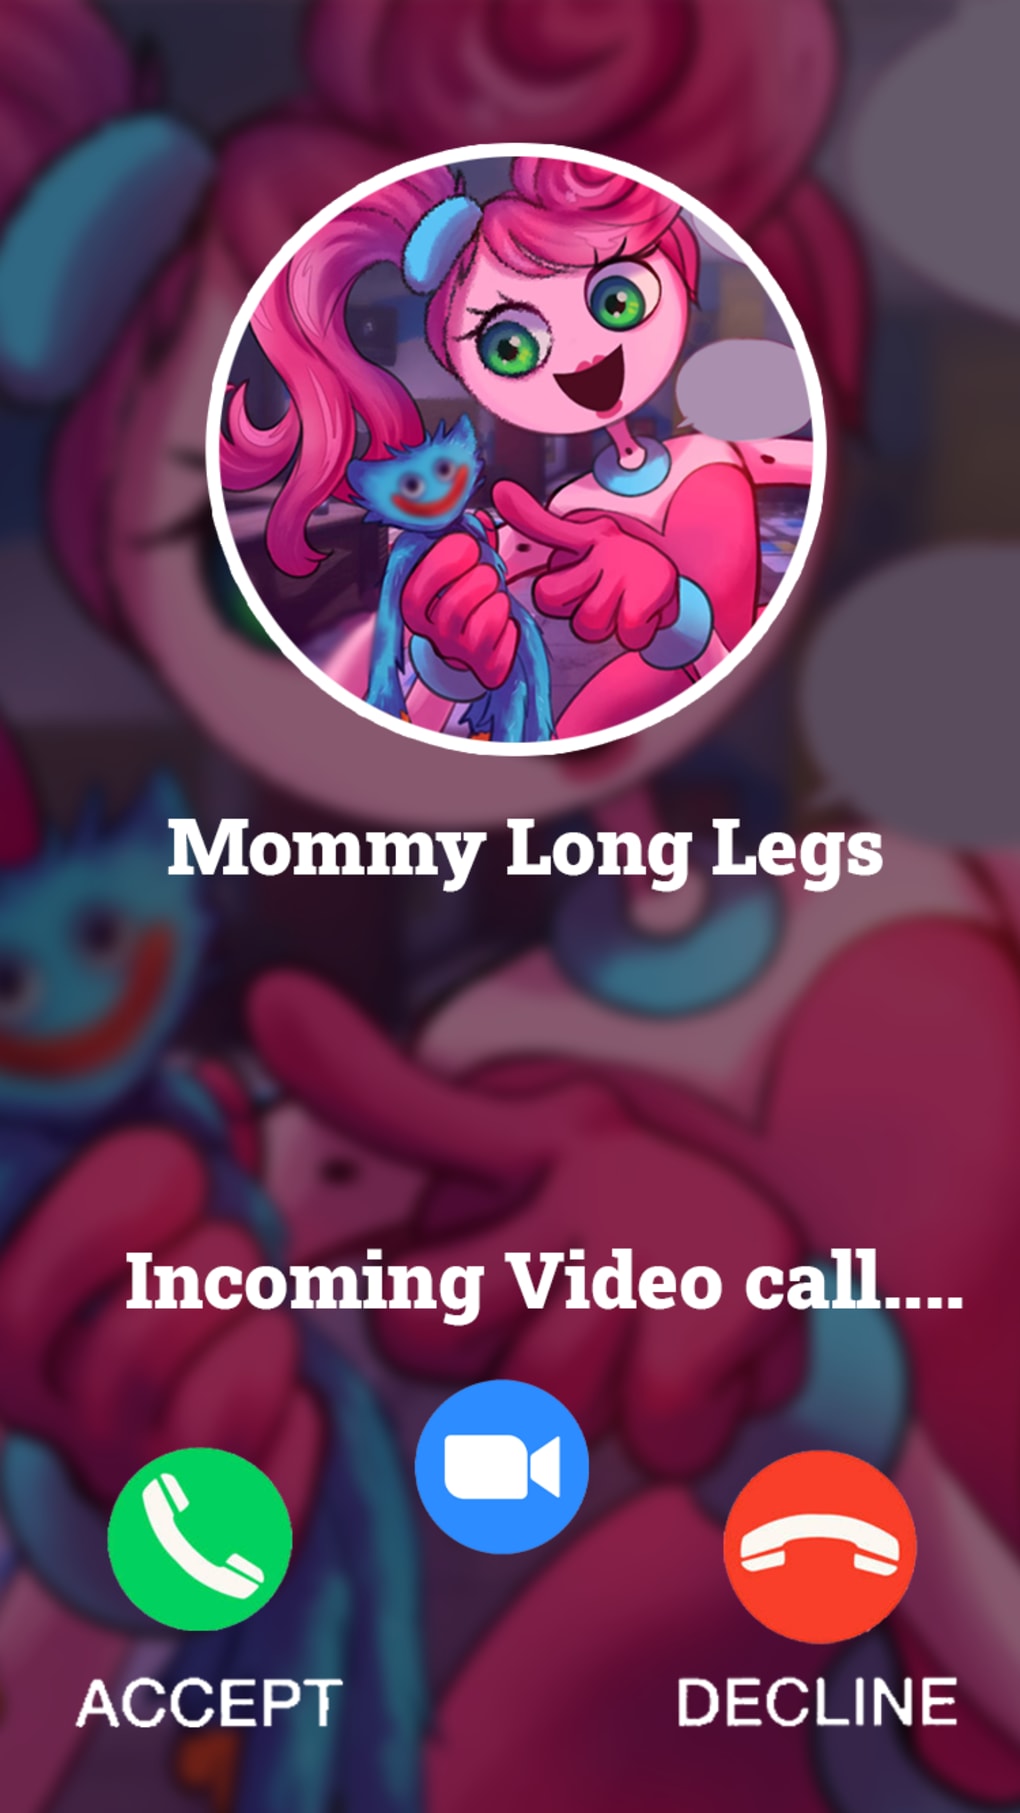 Download do APK de Mommy Long Legs Poppy 2 Tips para Android